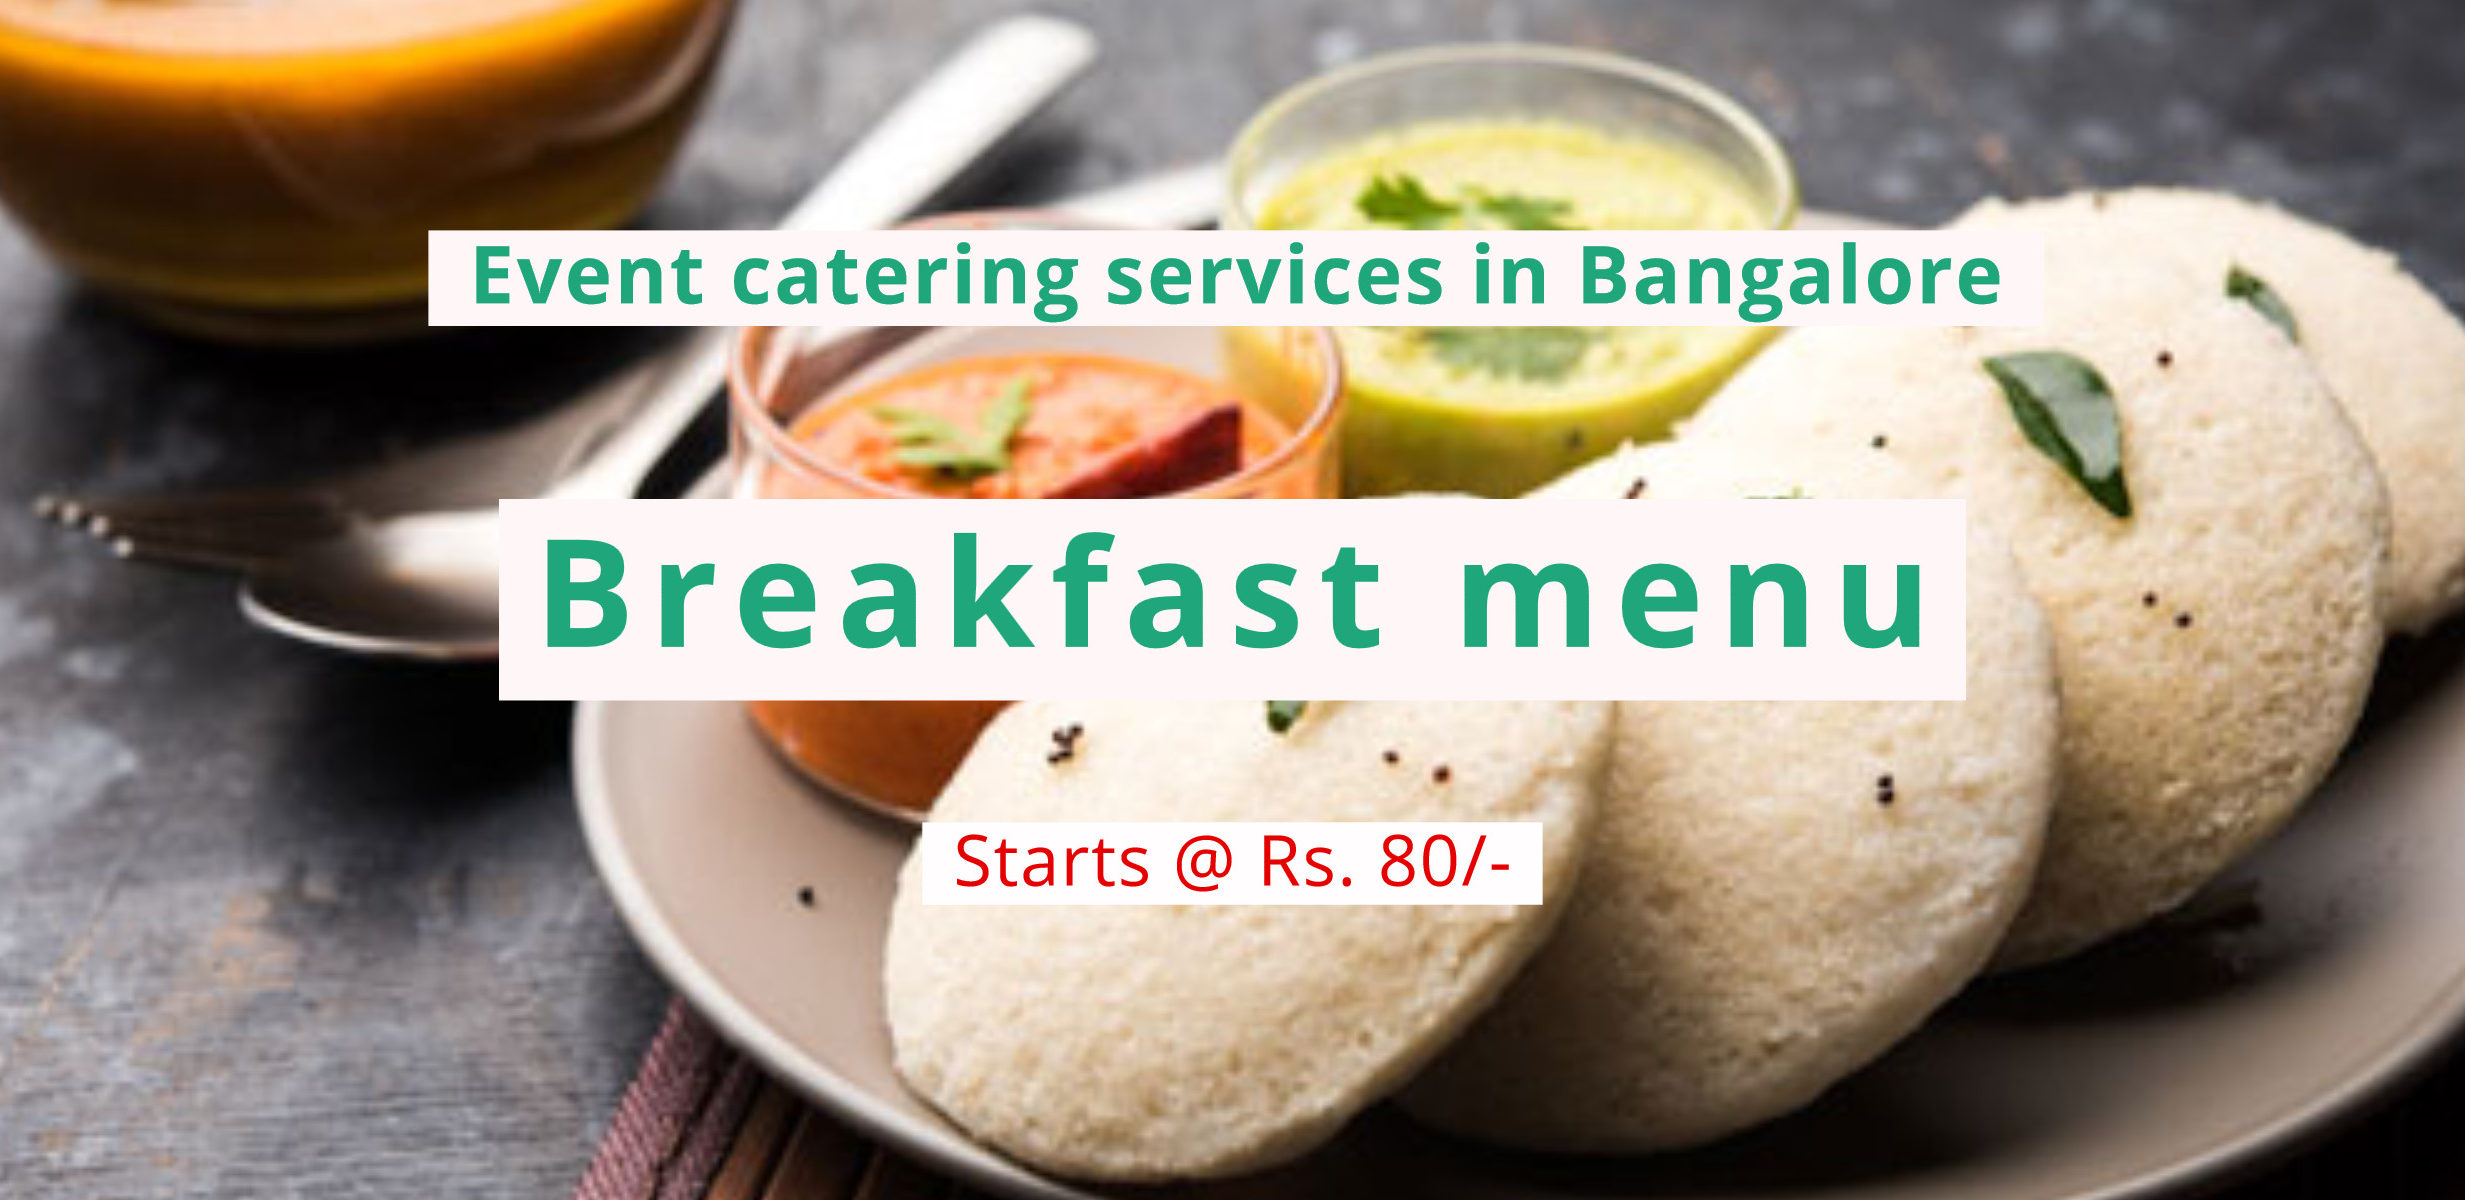 Event catering services breakfast menu Bangalore